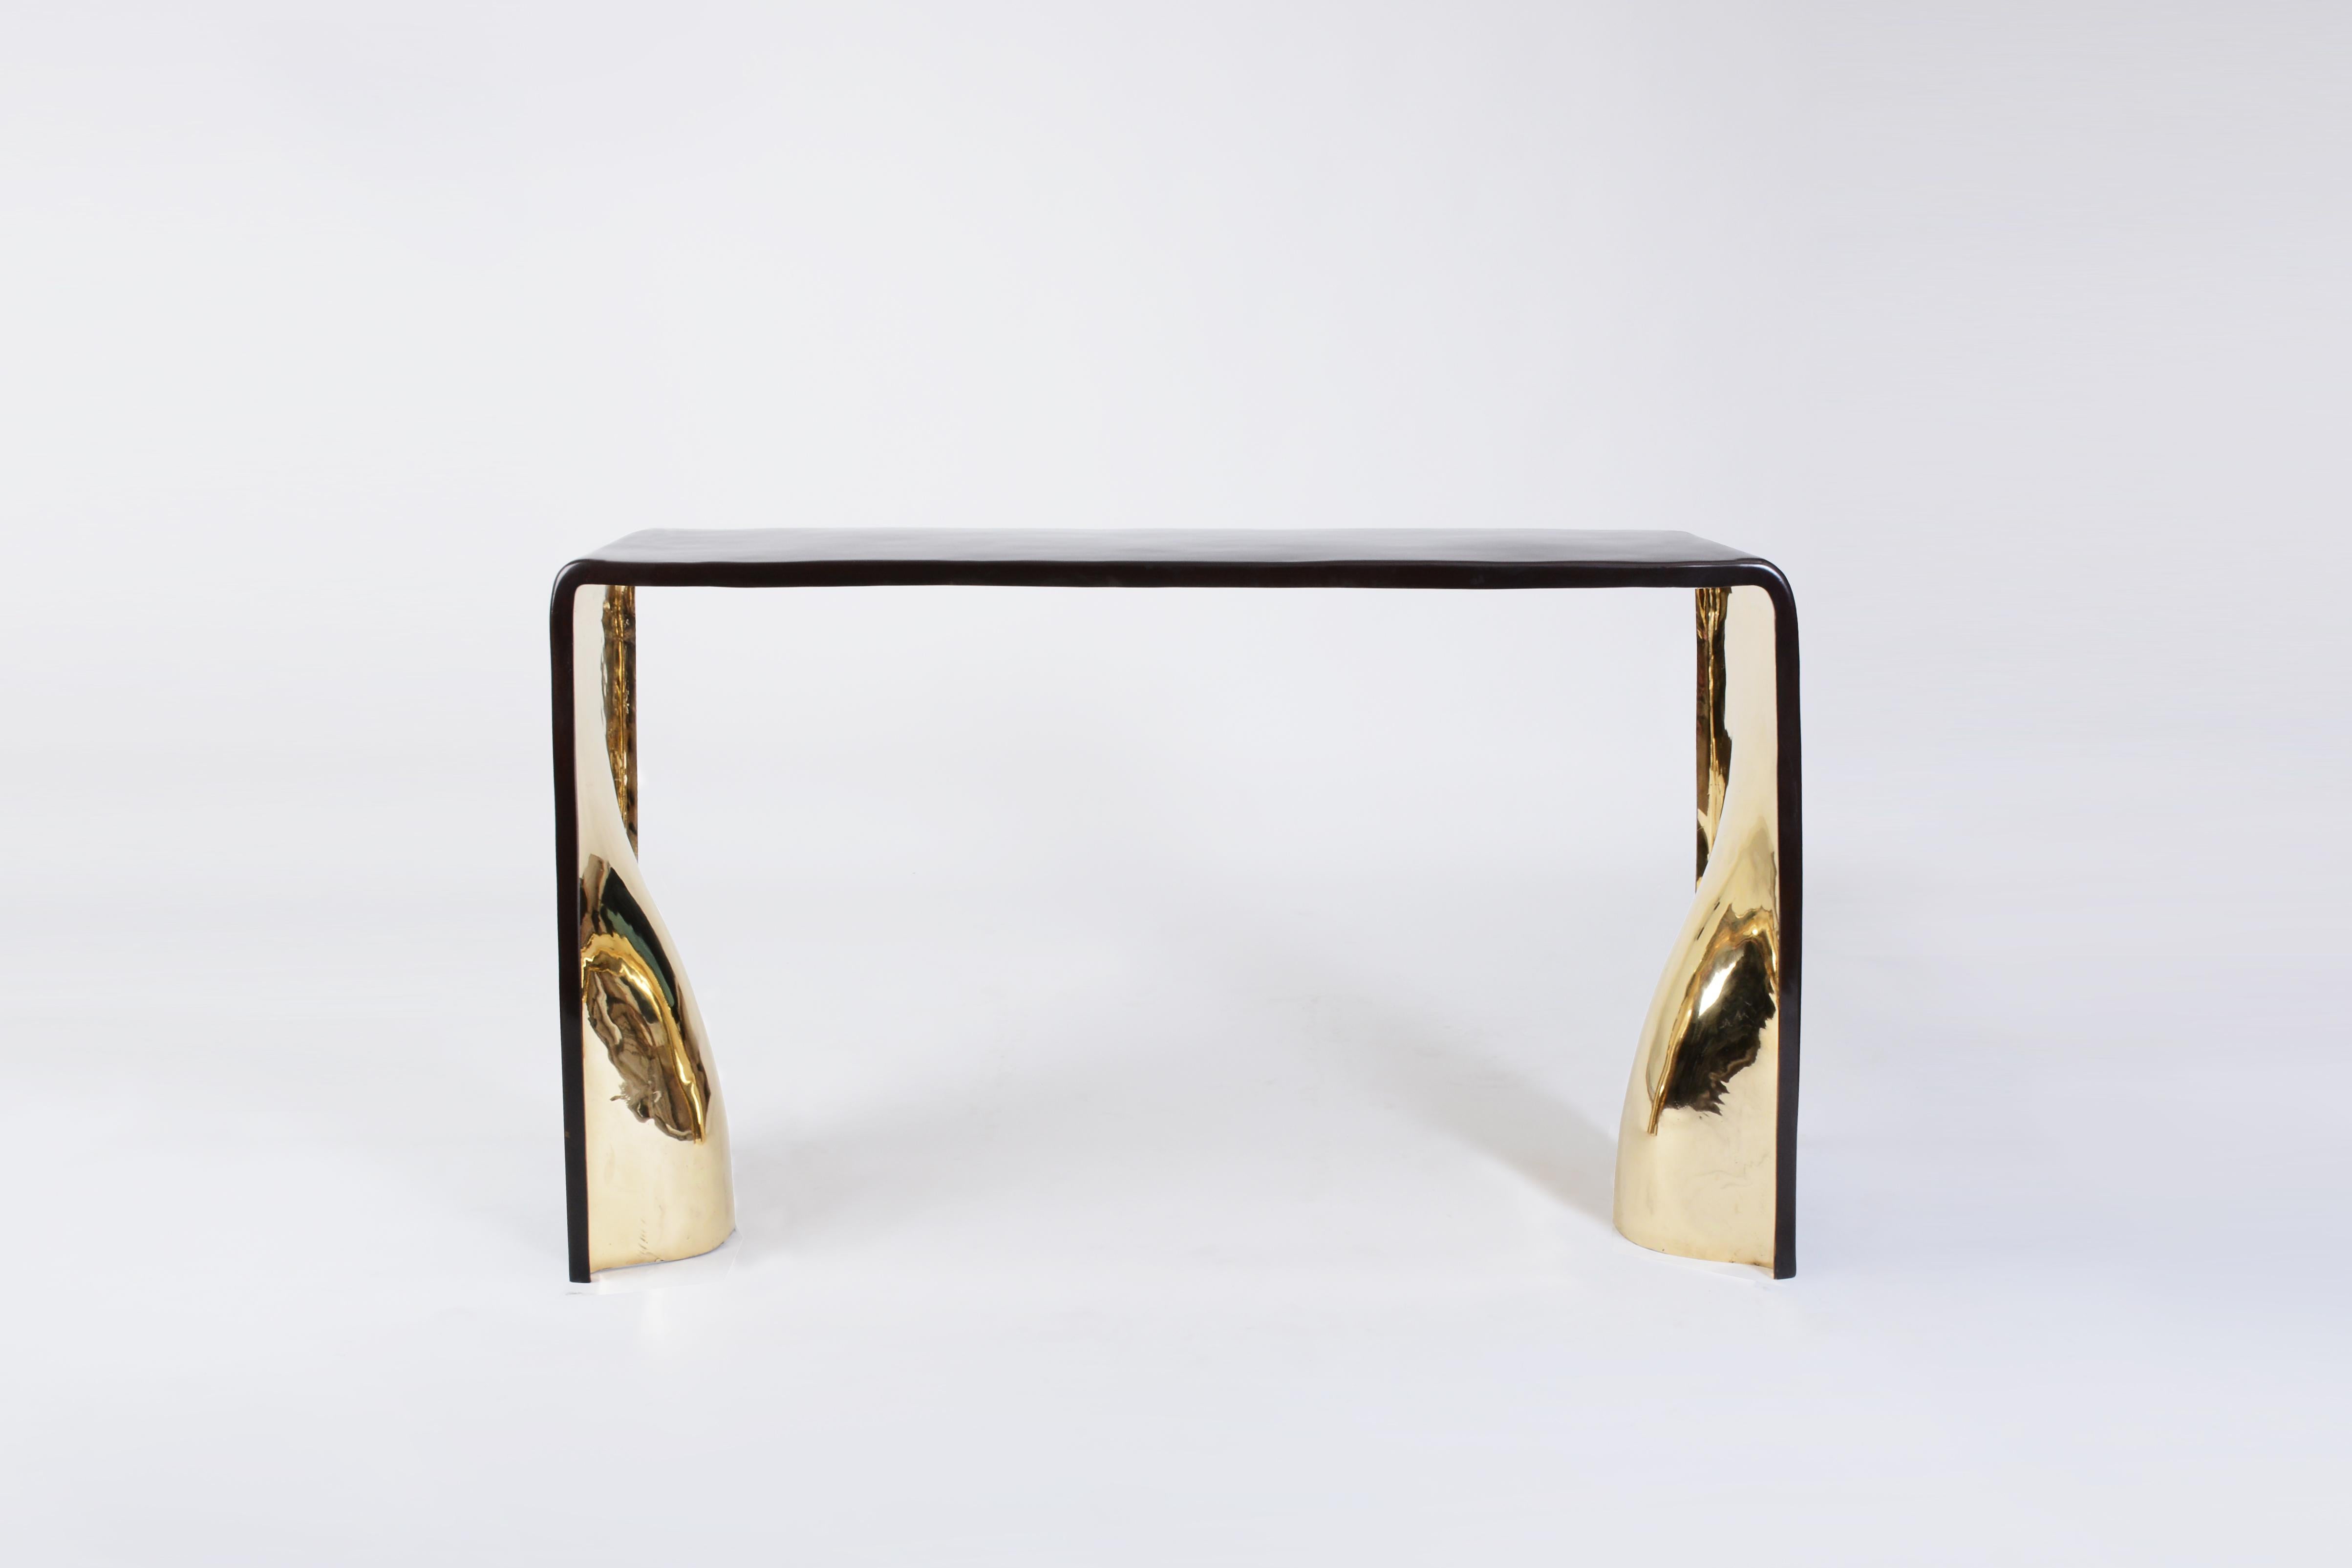 Khetan Console in Dark Bronze with Polished Gold Bronze Interior by Elan Atelier

The Khetan console is a bronze sculptural piece inspired by contemporary artists such as Constantin Brancusi and Isamu Noguchi. Cast using the lost wax method, the